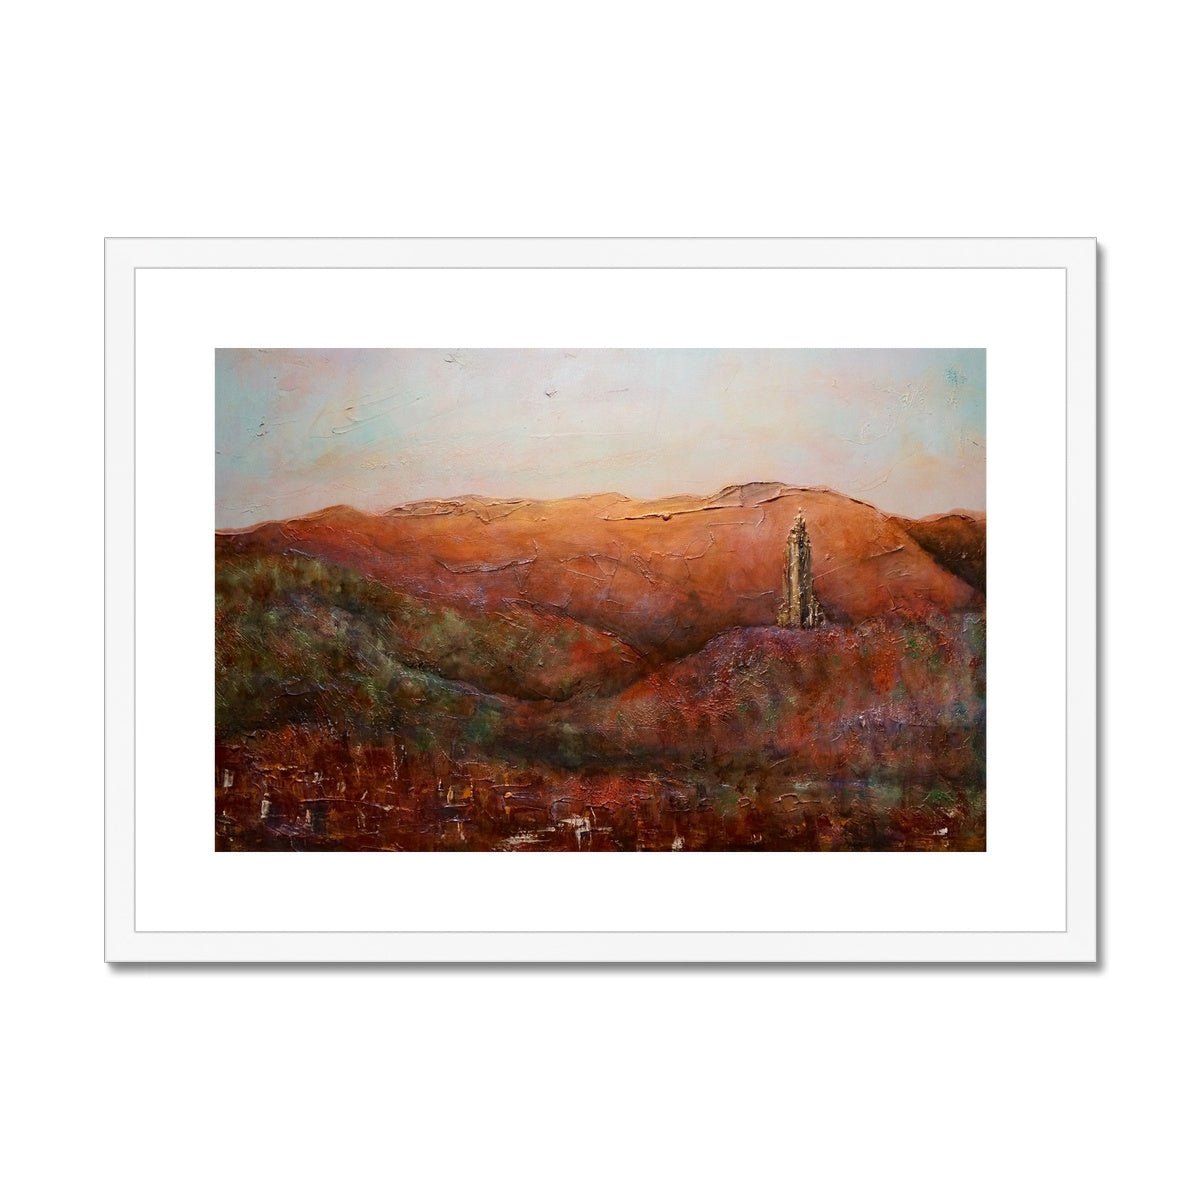 The Wallace Monument Painting | Framed & Mounted Prints From Scotland-Framed & Mounted Prints-Historic & Iconic Scotland Art Gallery-A2 Landscape-White Frame-Paintings, Prints, Homeware, Art Gifts From Scotland By Scottish Artist Kevin Hunter